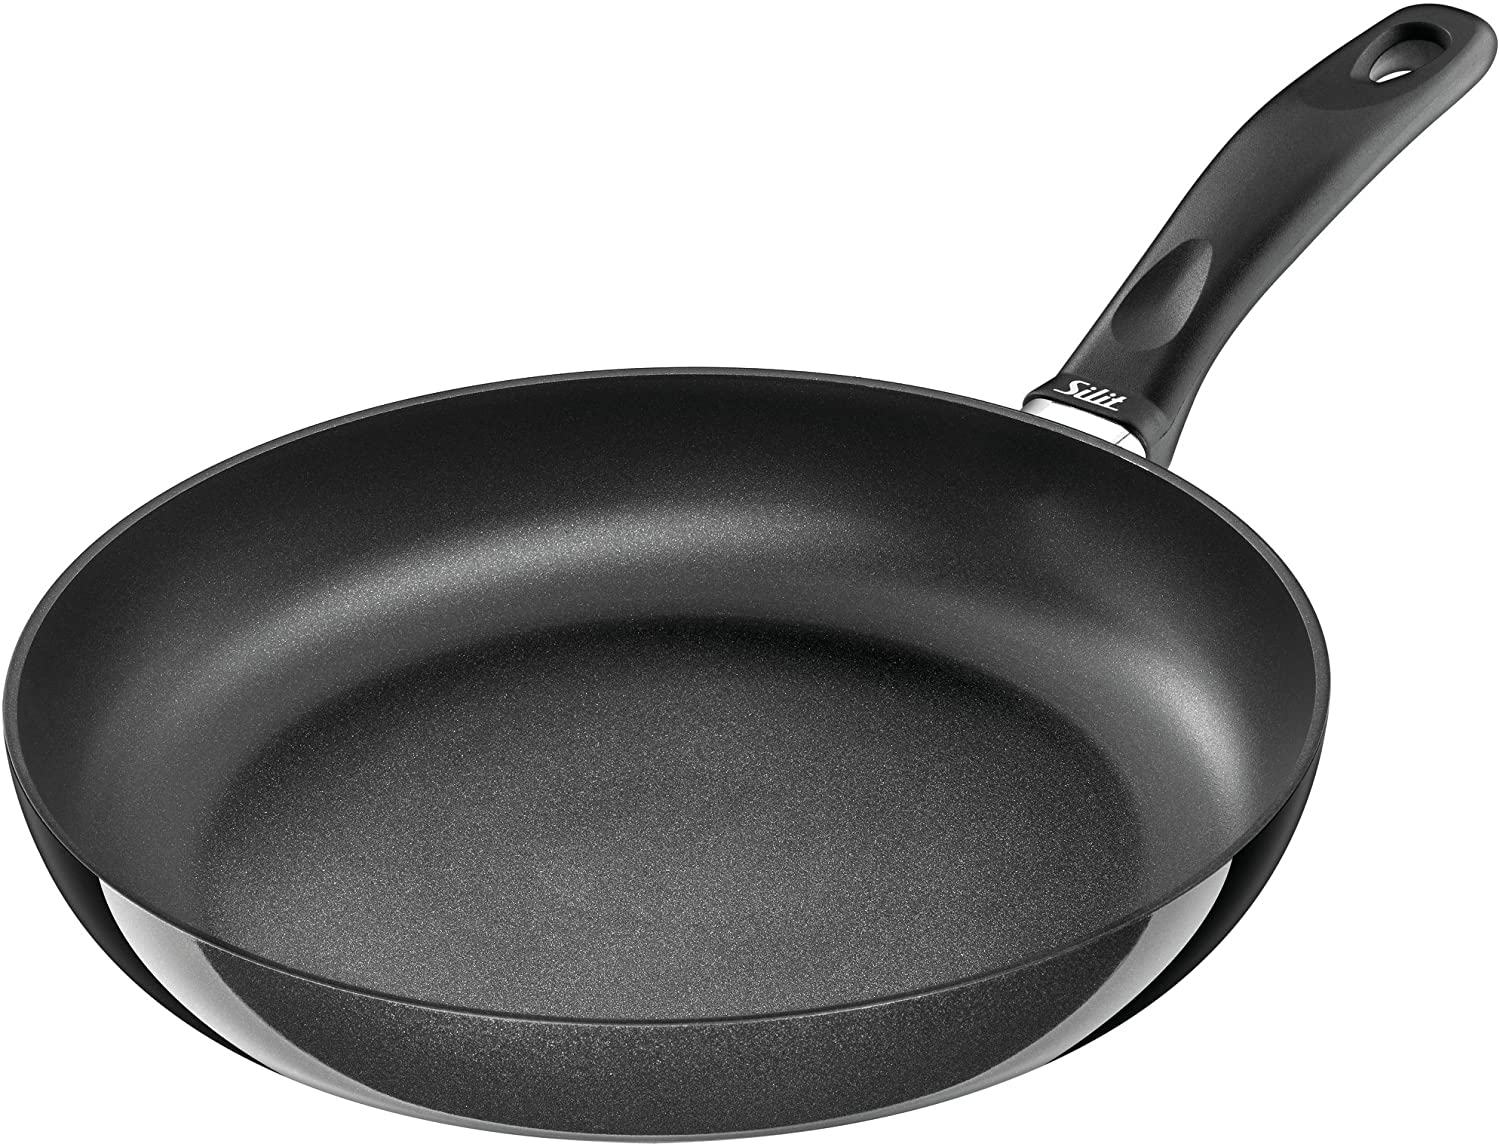 Silit Futura 28 cm Die-Cast Aluminium Coated Frying Pan with Flame Protection Plastic Handle